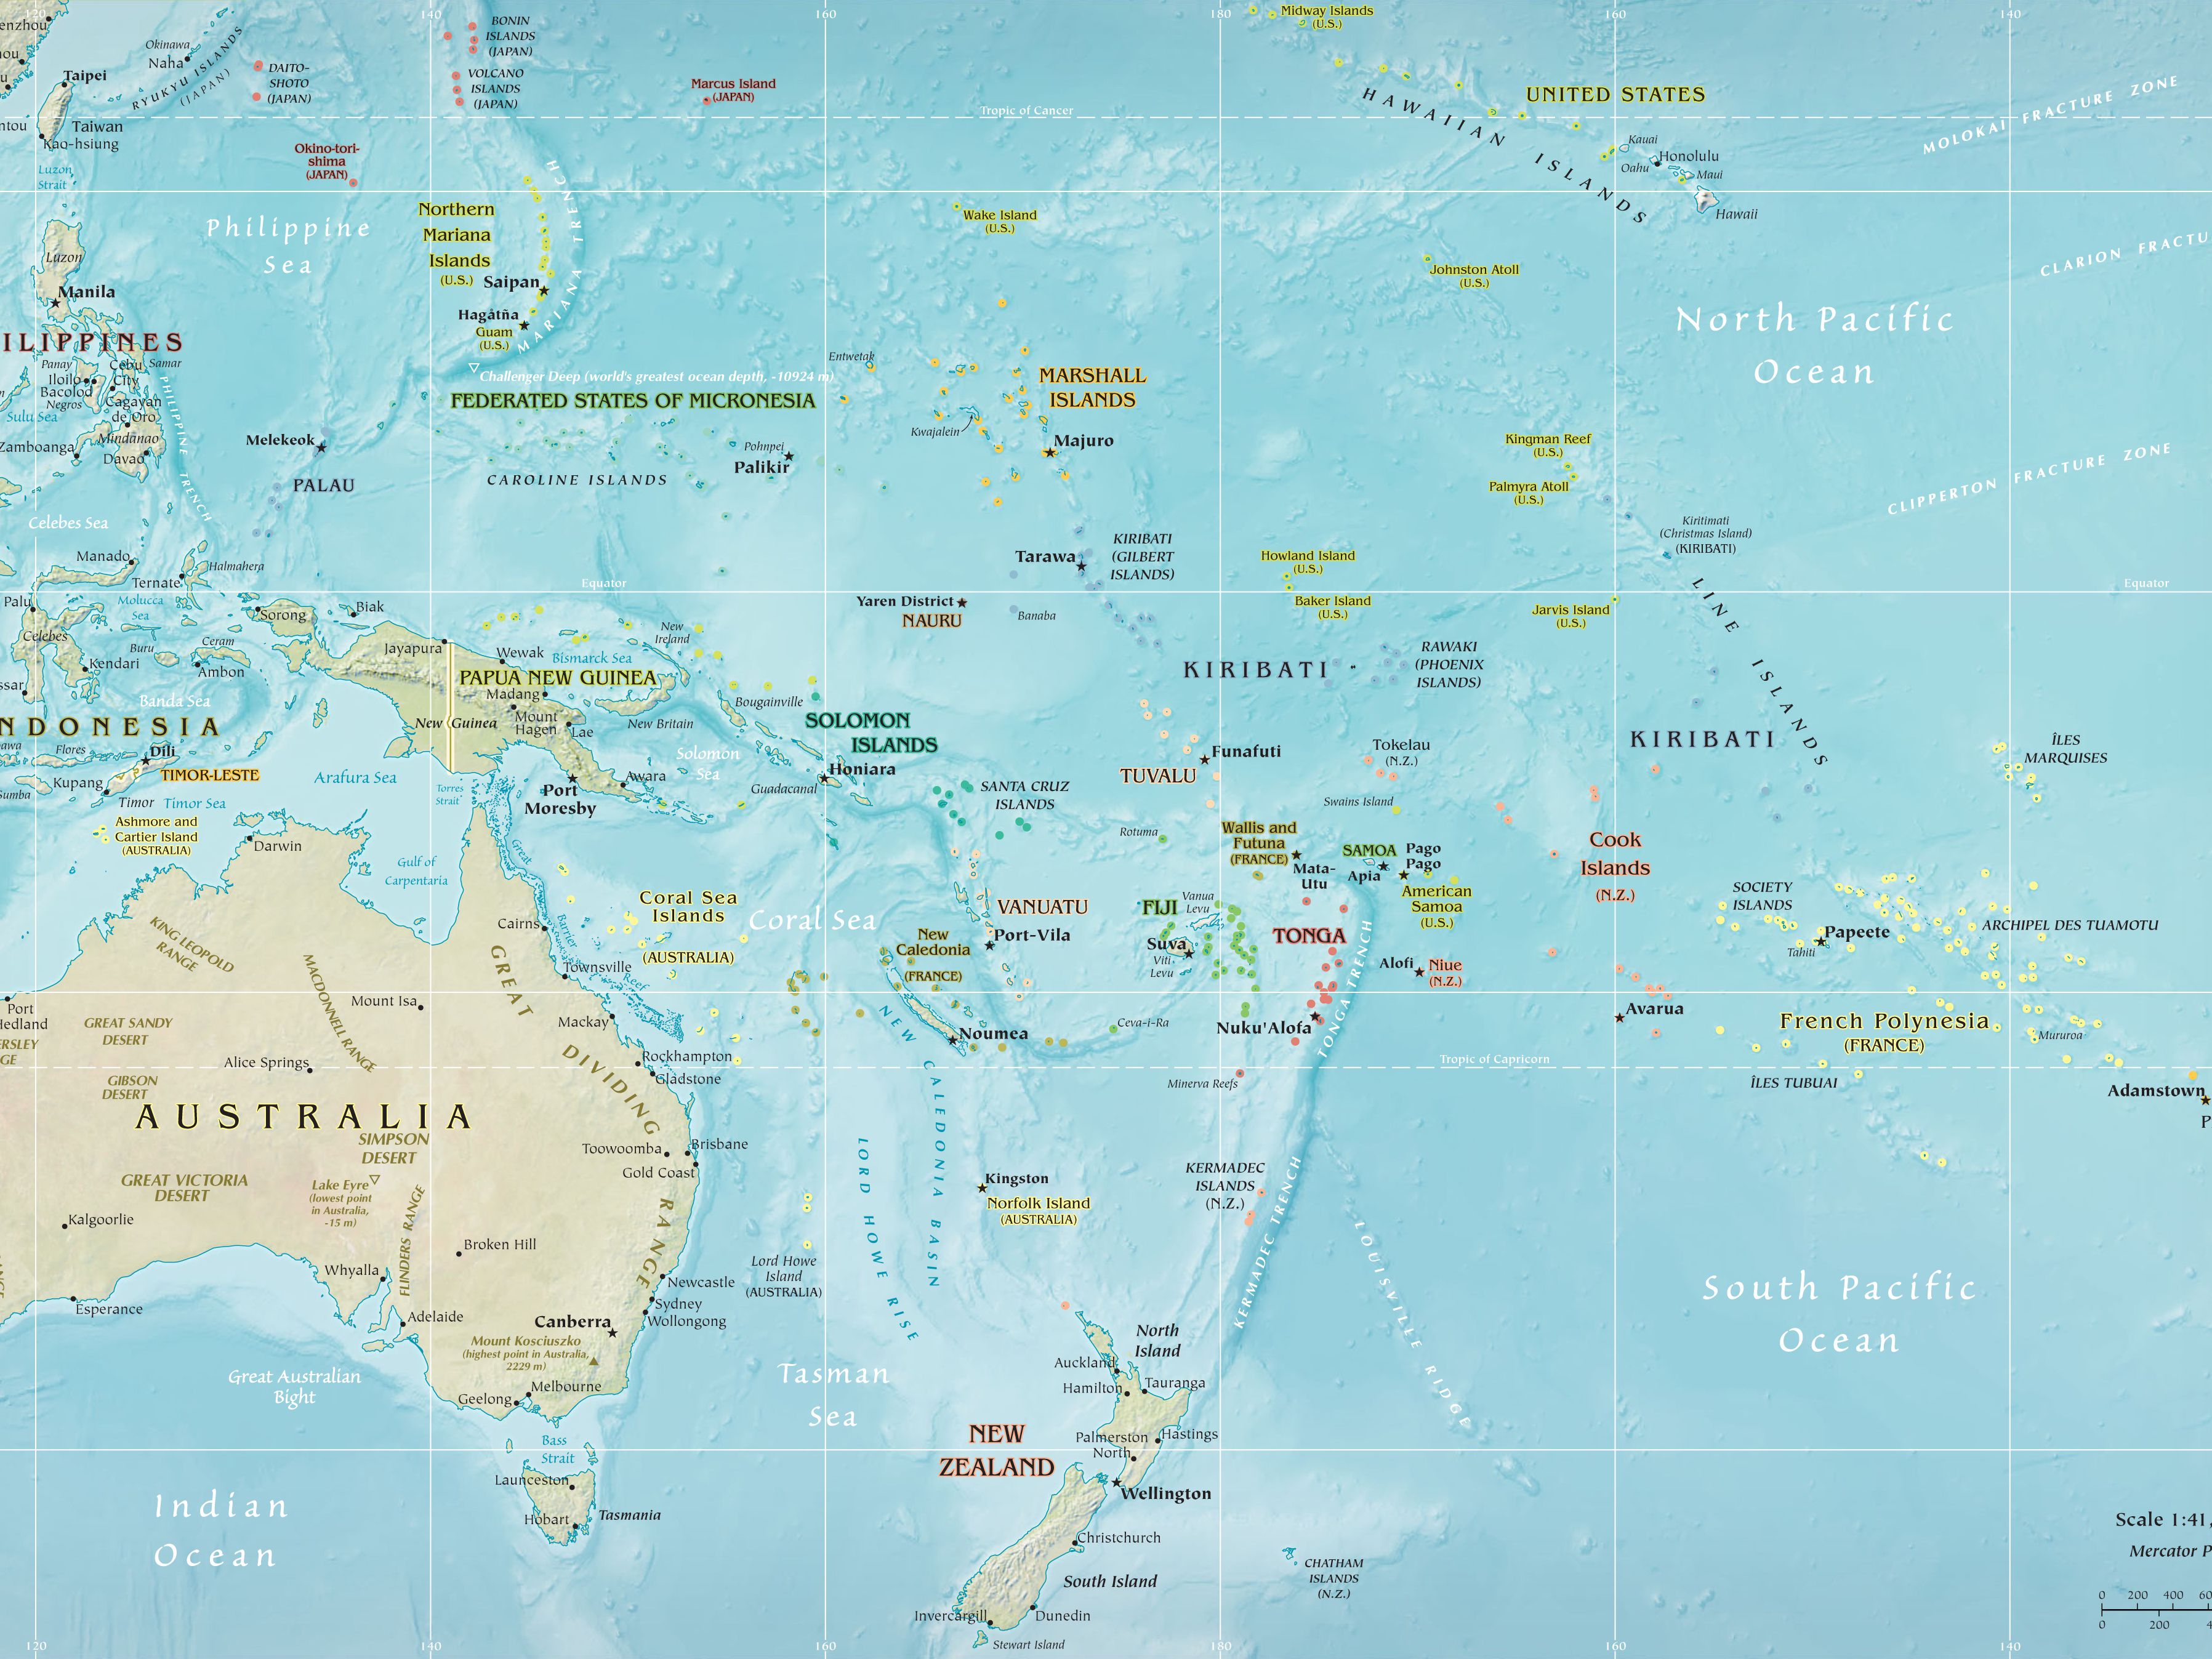 Discover Oceania's 14 Countries